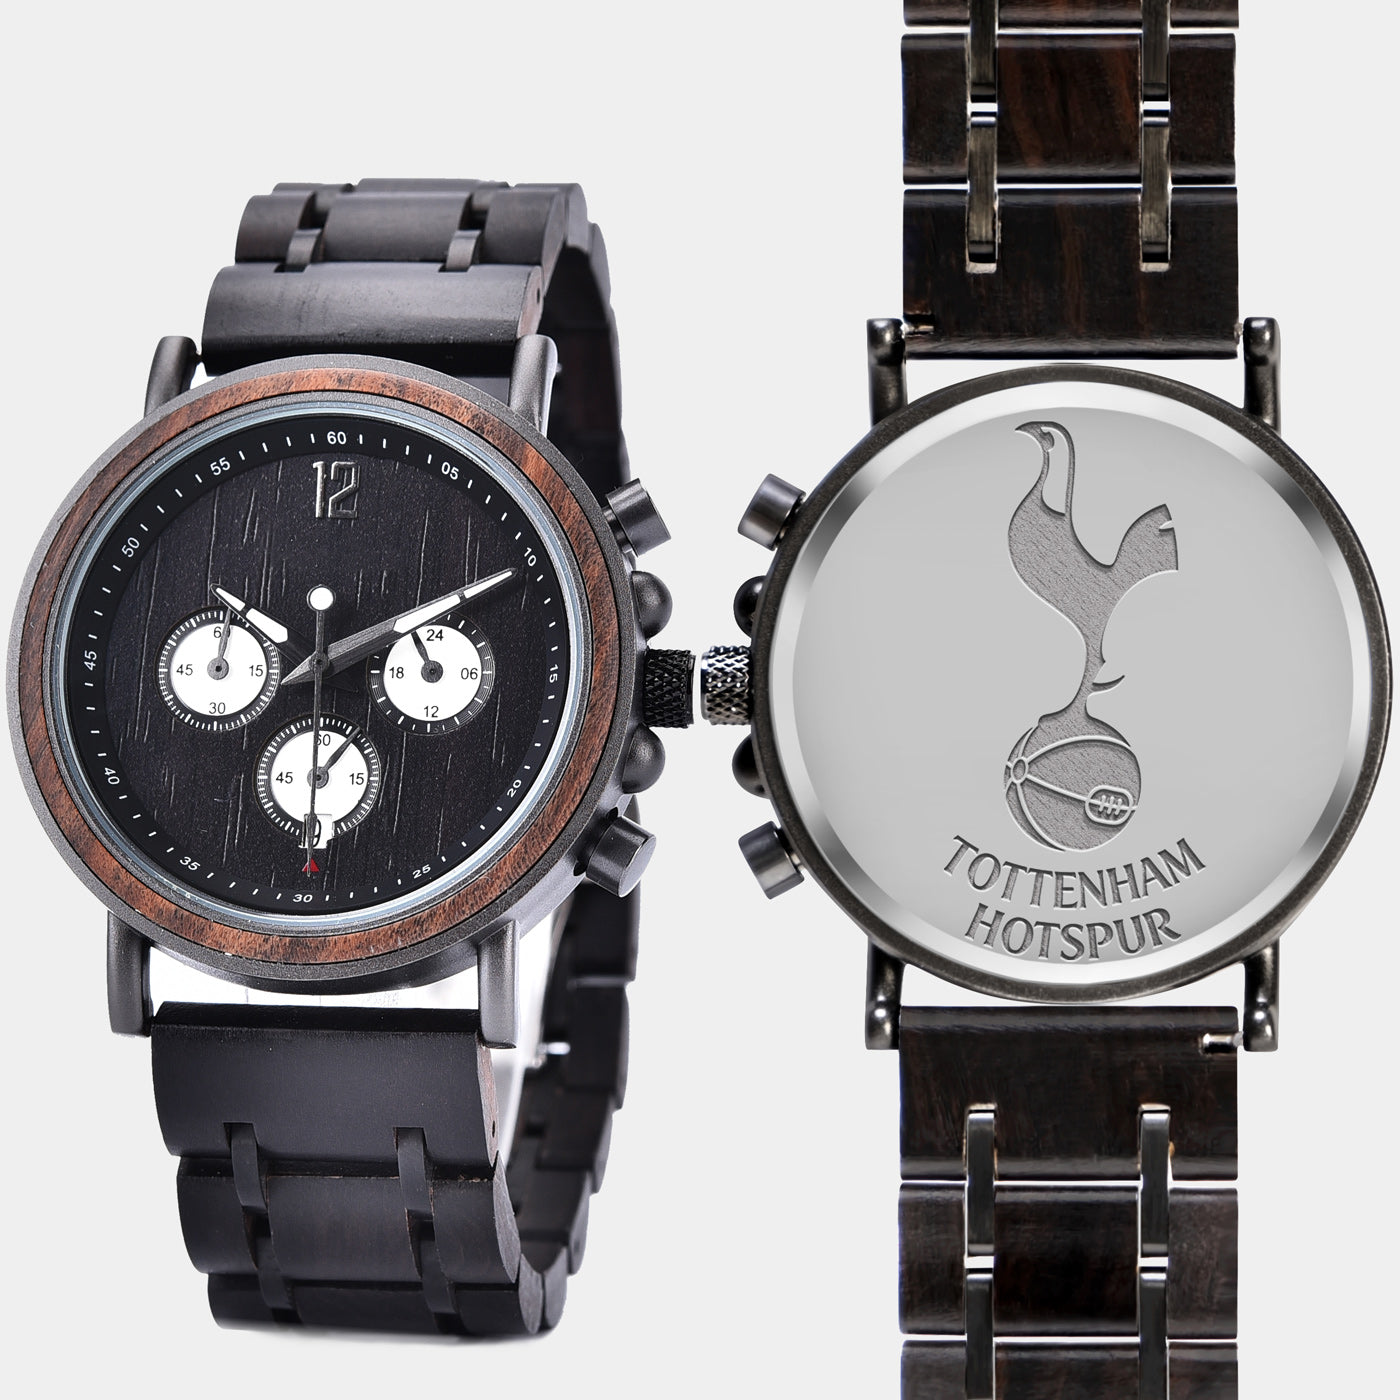 Tottenham Hotspur F.C. Mens Wrist Watch  - Personalized Tottenham Hotspur F.C. Mens Watches - Custom Gifts For Him, Birthday Gifts, Gift For Dad - Best 2022 Tottenham Hotspur F.C. Christmas Gifts - Black 45mm FC Wood Watch